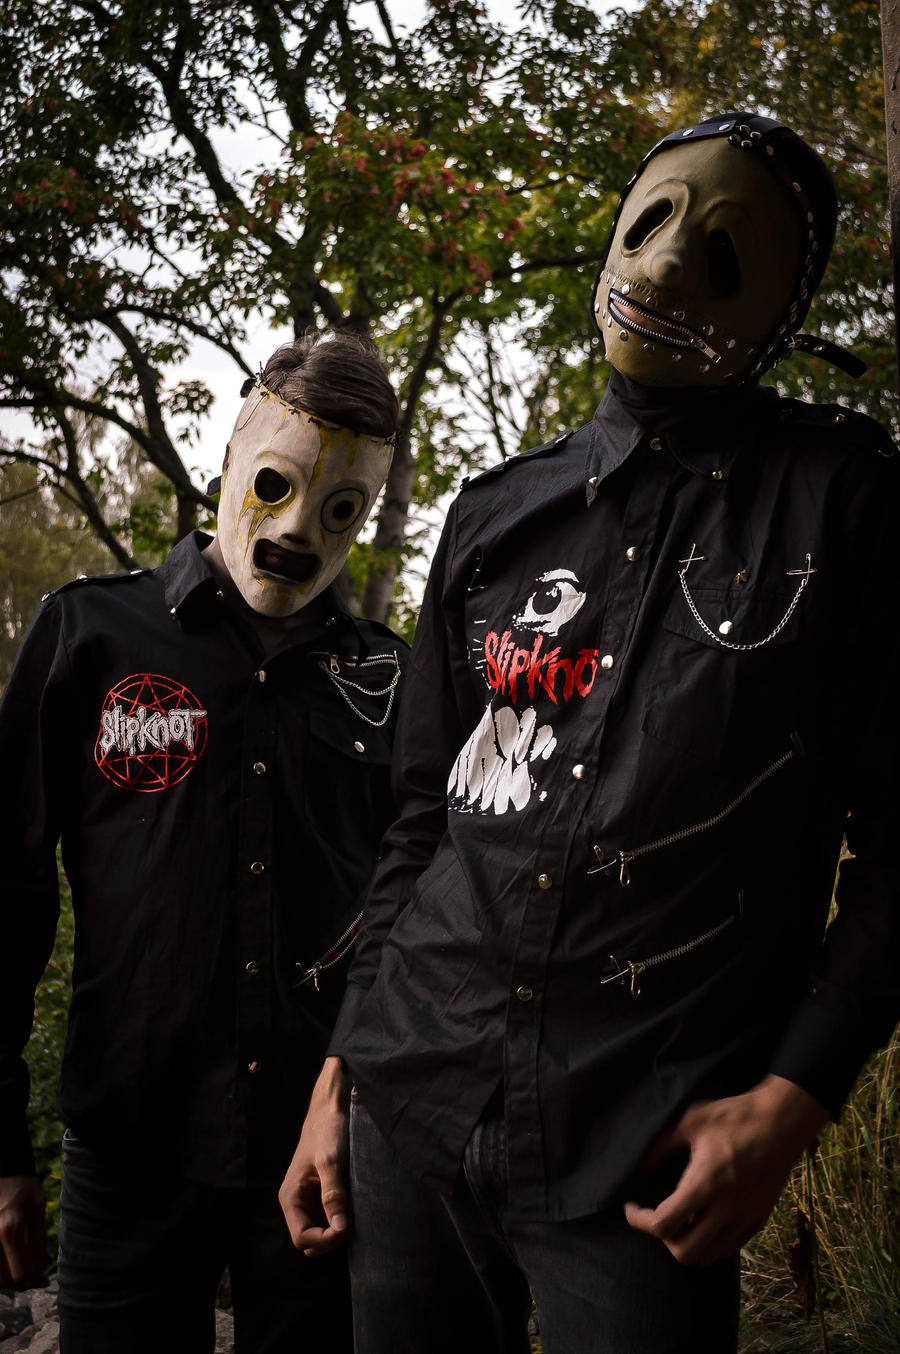 badge Damn it Foresee Slipknot Cosplay - Corey and Chris by Hexalot on DeviantArt